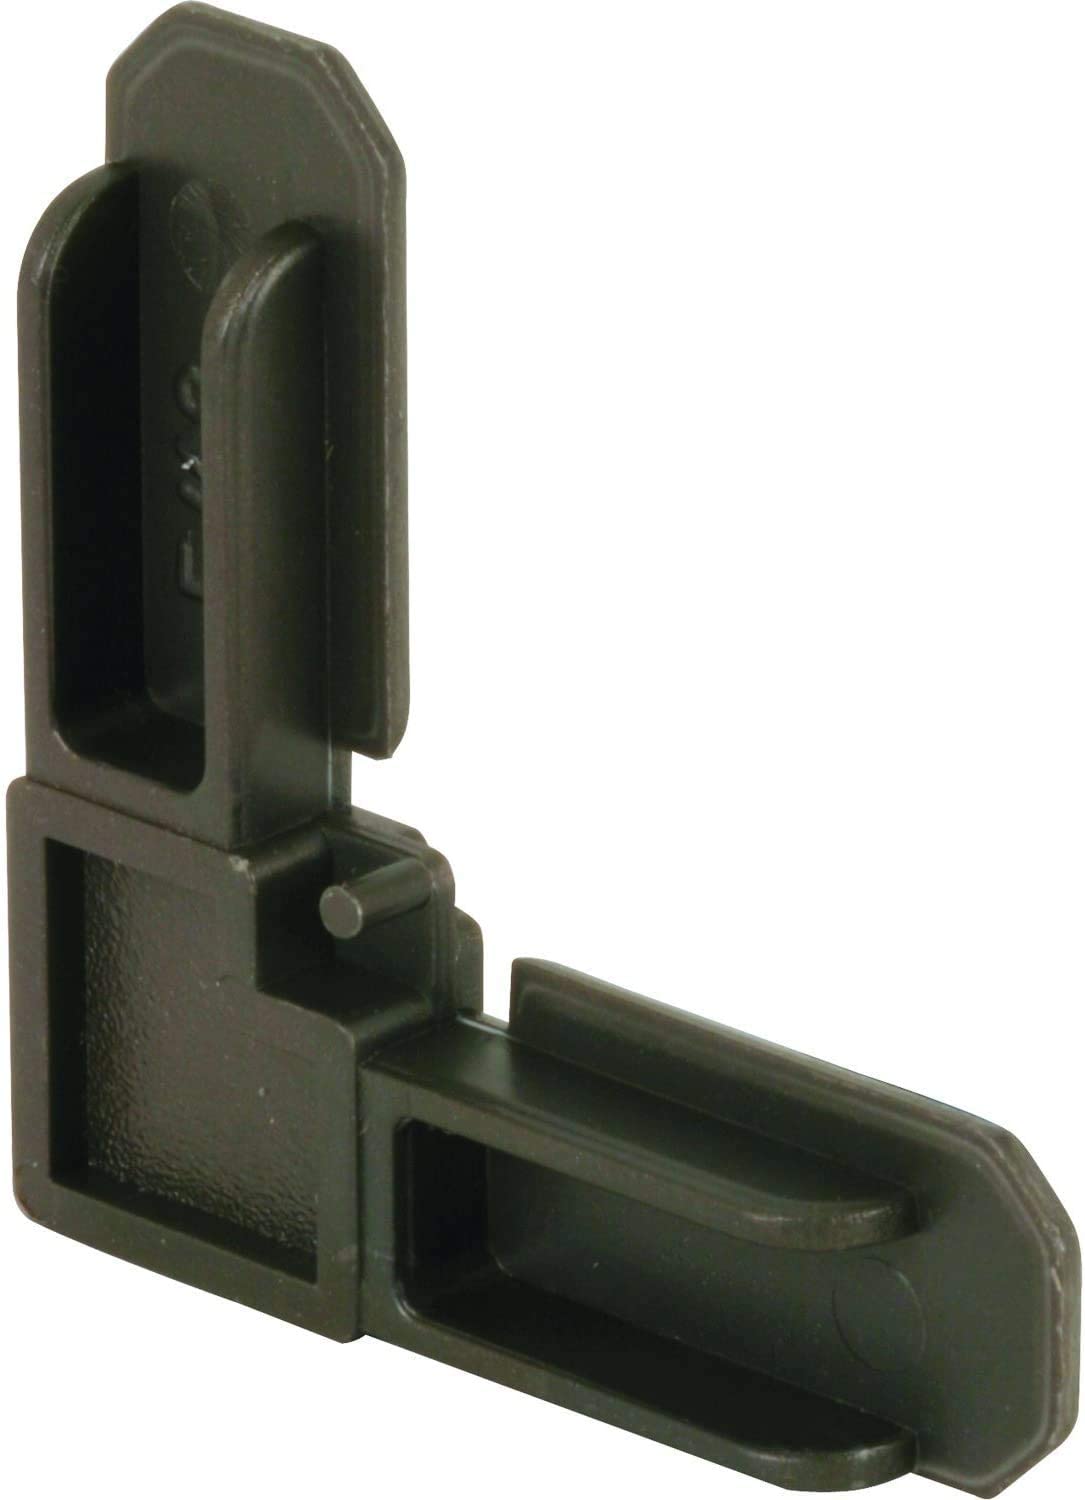 Bronze Screen Frame Corners (3/8-Inch) - $7.99 with Free Shipping - Kool Products